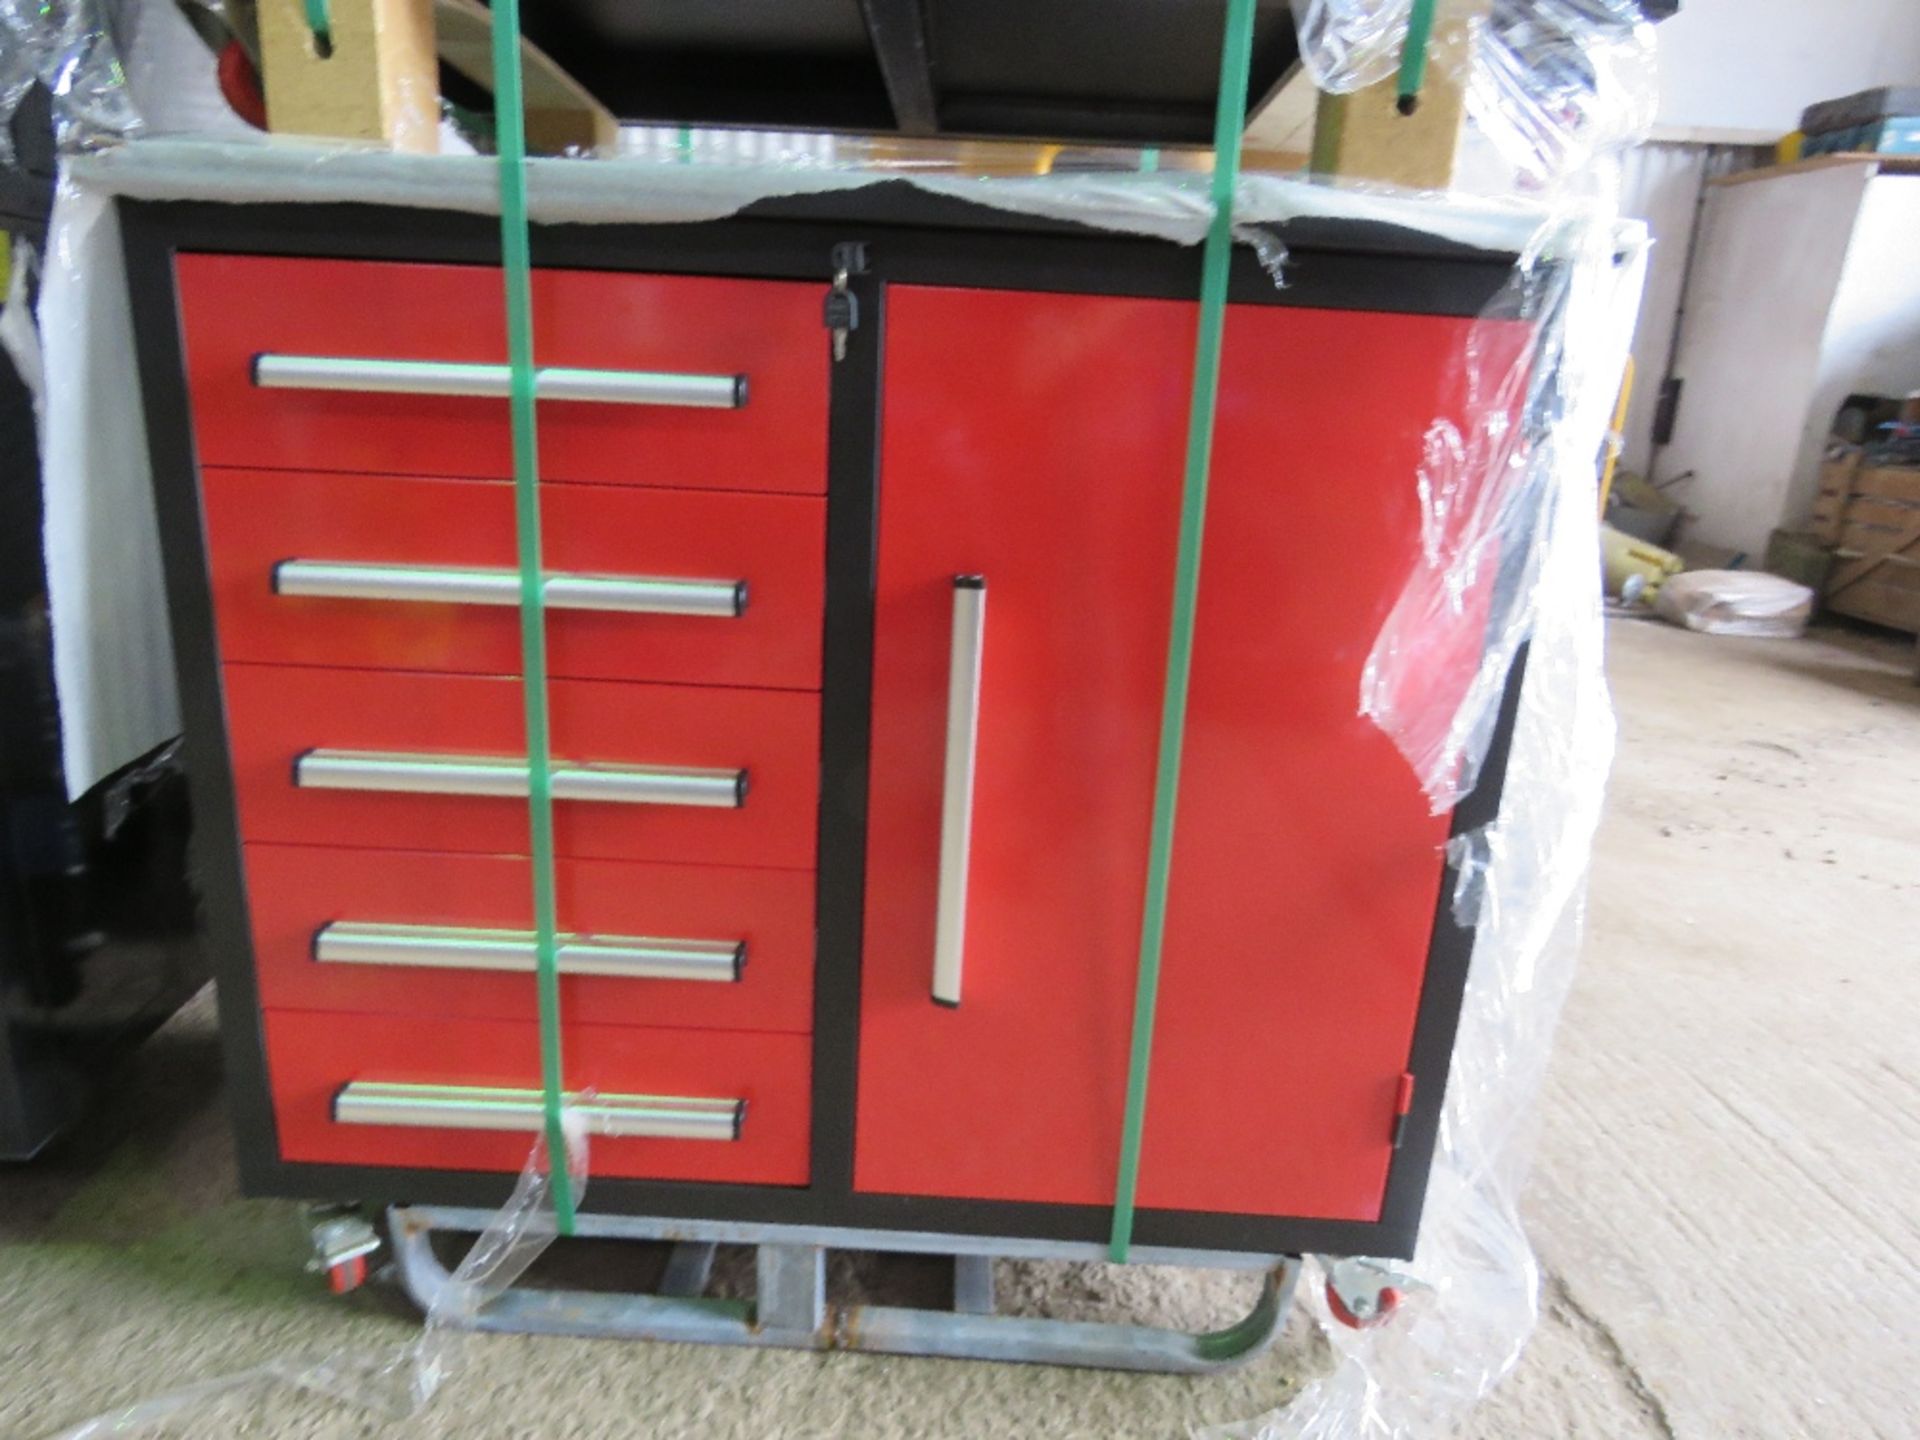 RED COLOURED WORKSHOP TOOL CABINET WITH WHEELS 1.12M WIDE X 0.65M DEPTH APPROX. - Image 3 of 3